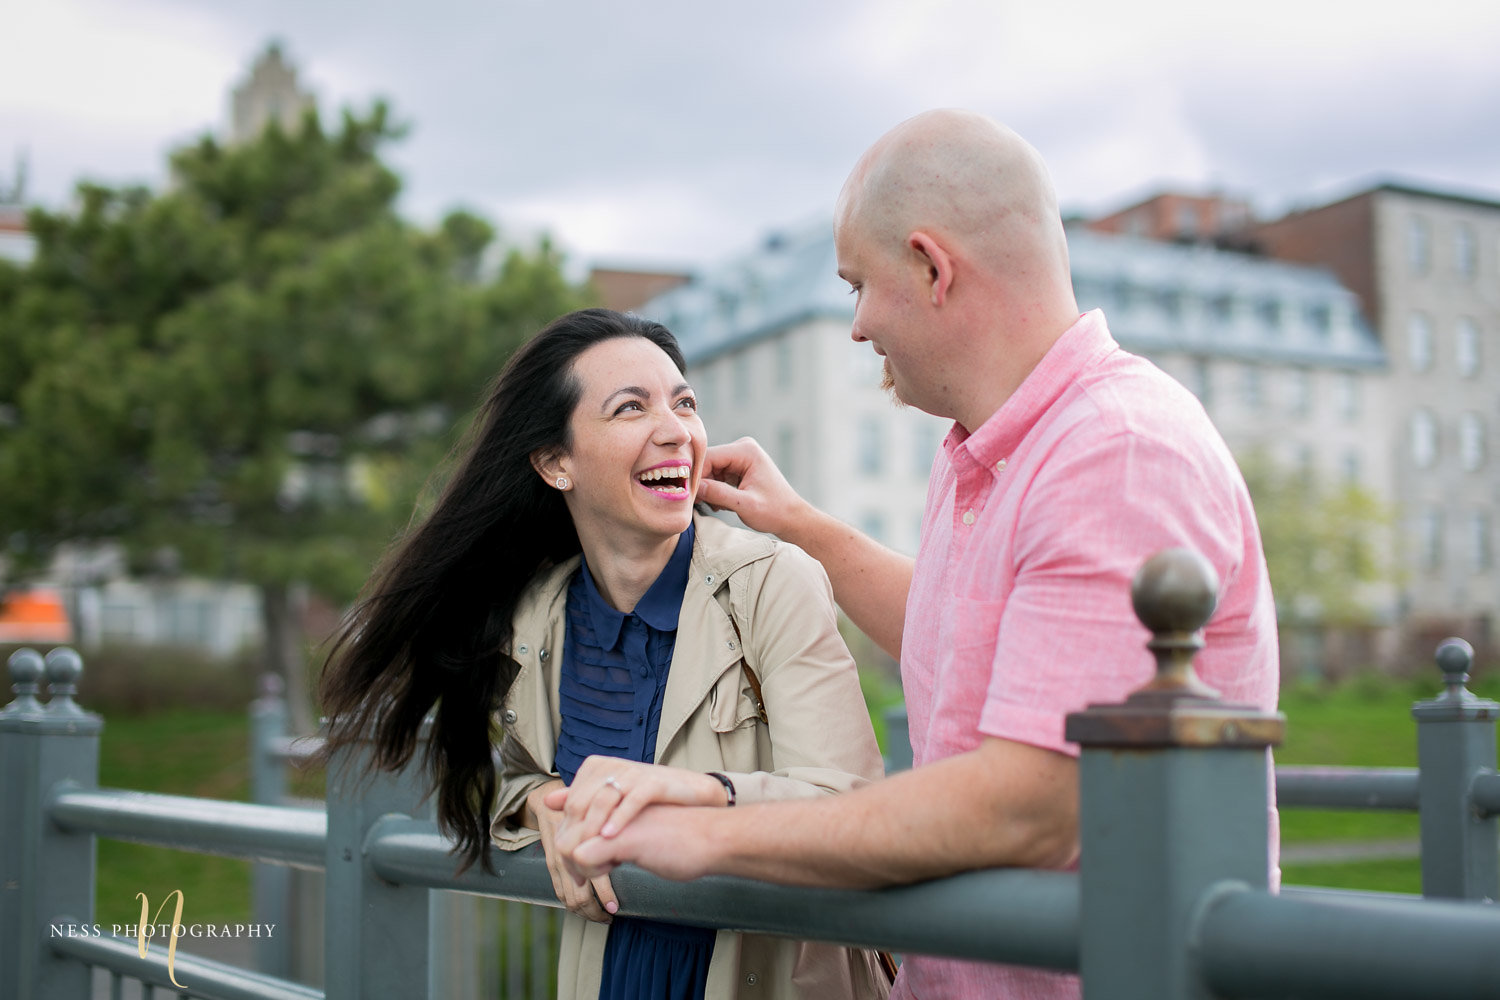 Couple looking at each other and laughing on a bride in the old port of montreal during their engagement photoshoot